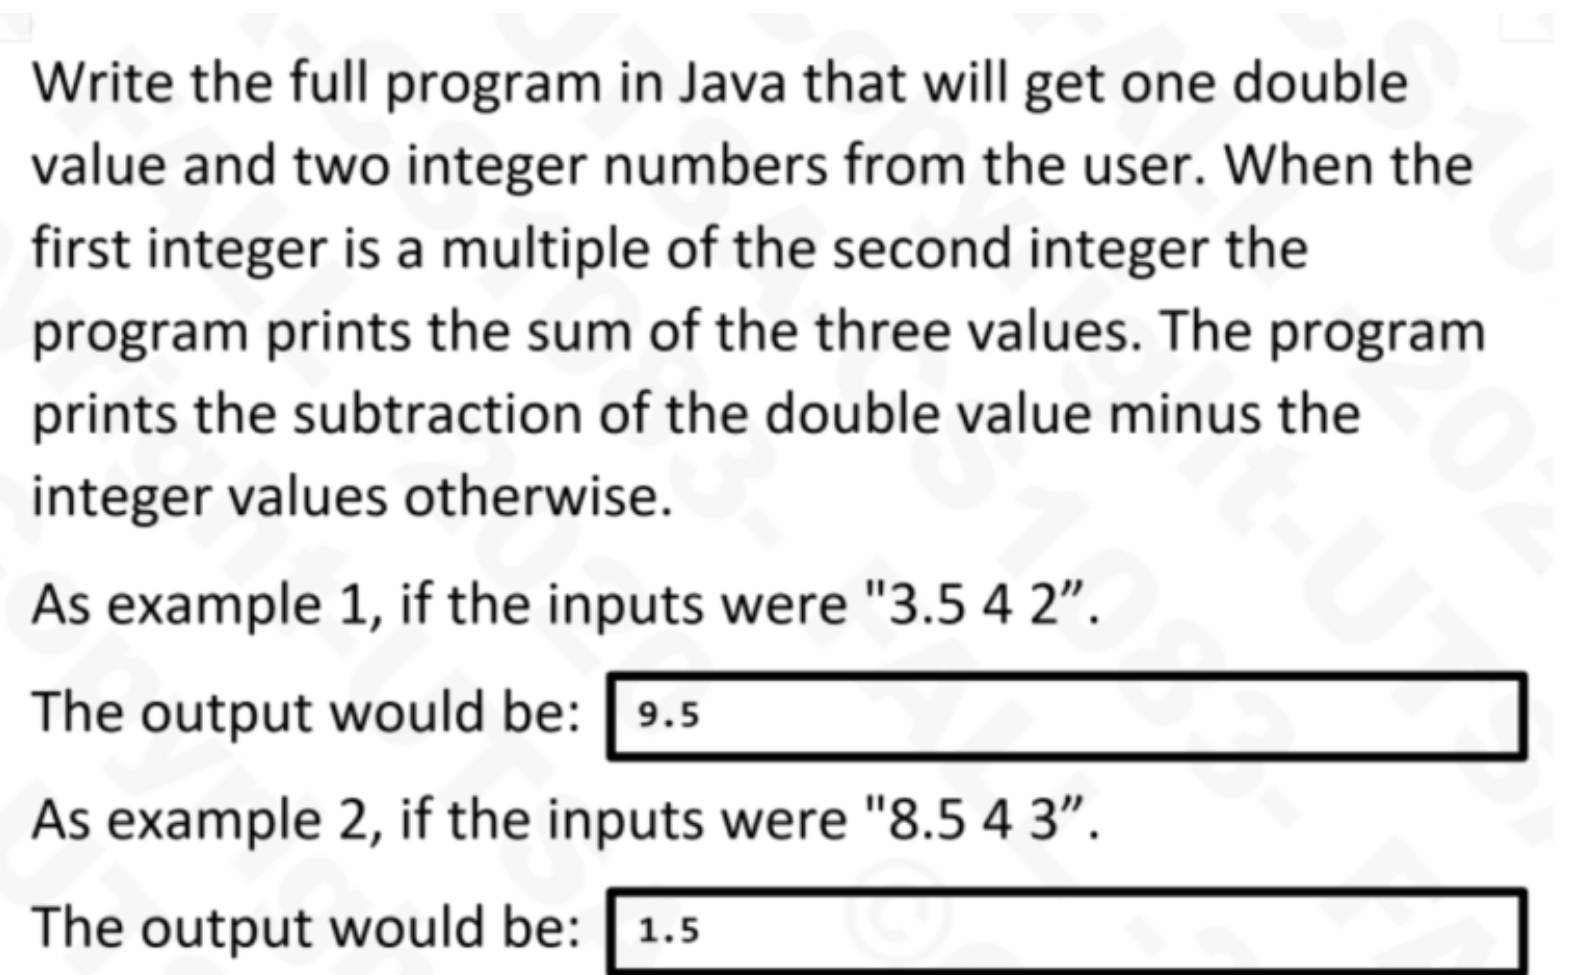 Write the full program in Java that will get one double value and two integer numbers from the user. When the